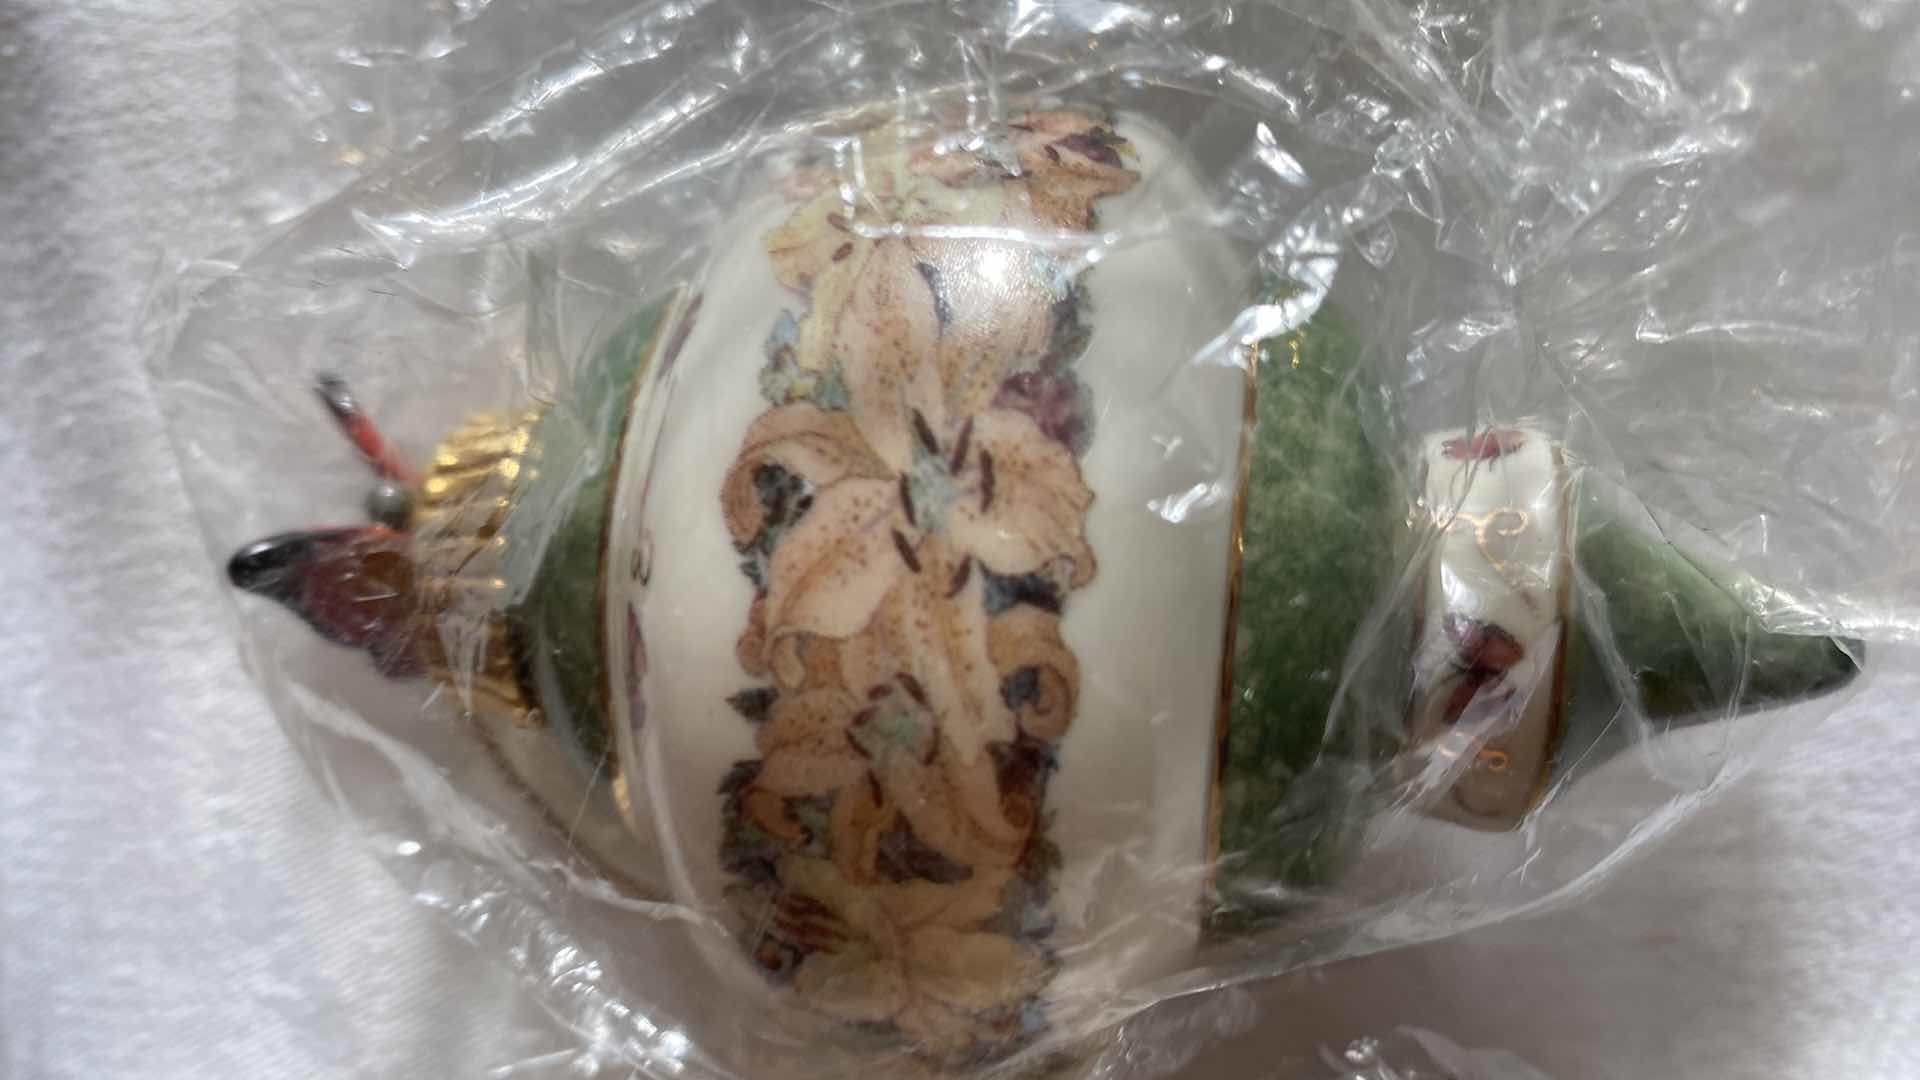 Photo 4 of VINTAGE FOUR LENA LIU’s FLORAL INSPIRATIONS PORCELAIN ORNAMENTS COLLECTIBLES BY BRADFORD EXCHANGE WITH 2 CERTIFICATE OF AUTHENTICITY (Pattern on certificate may not be correct)